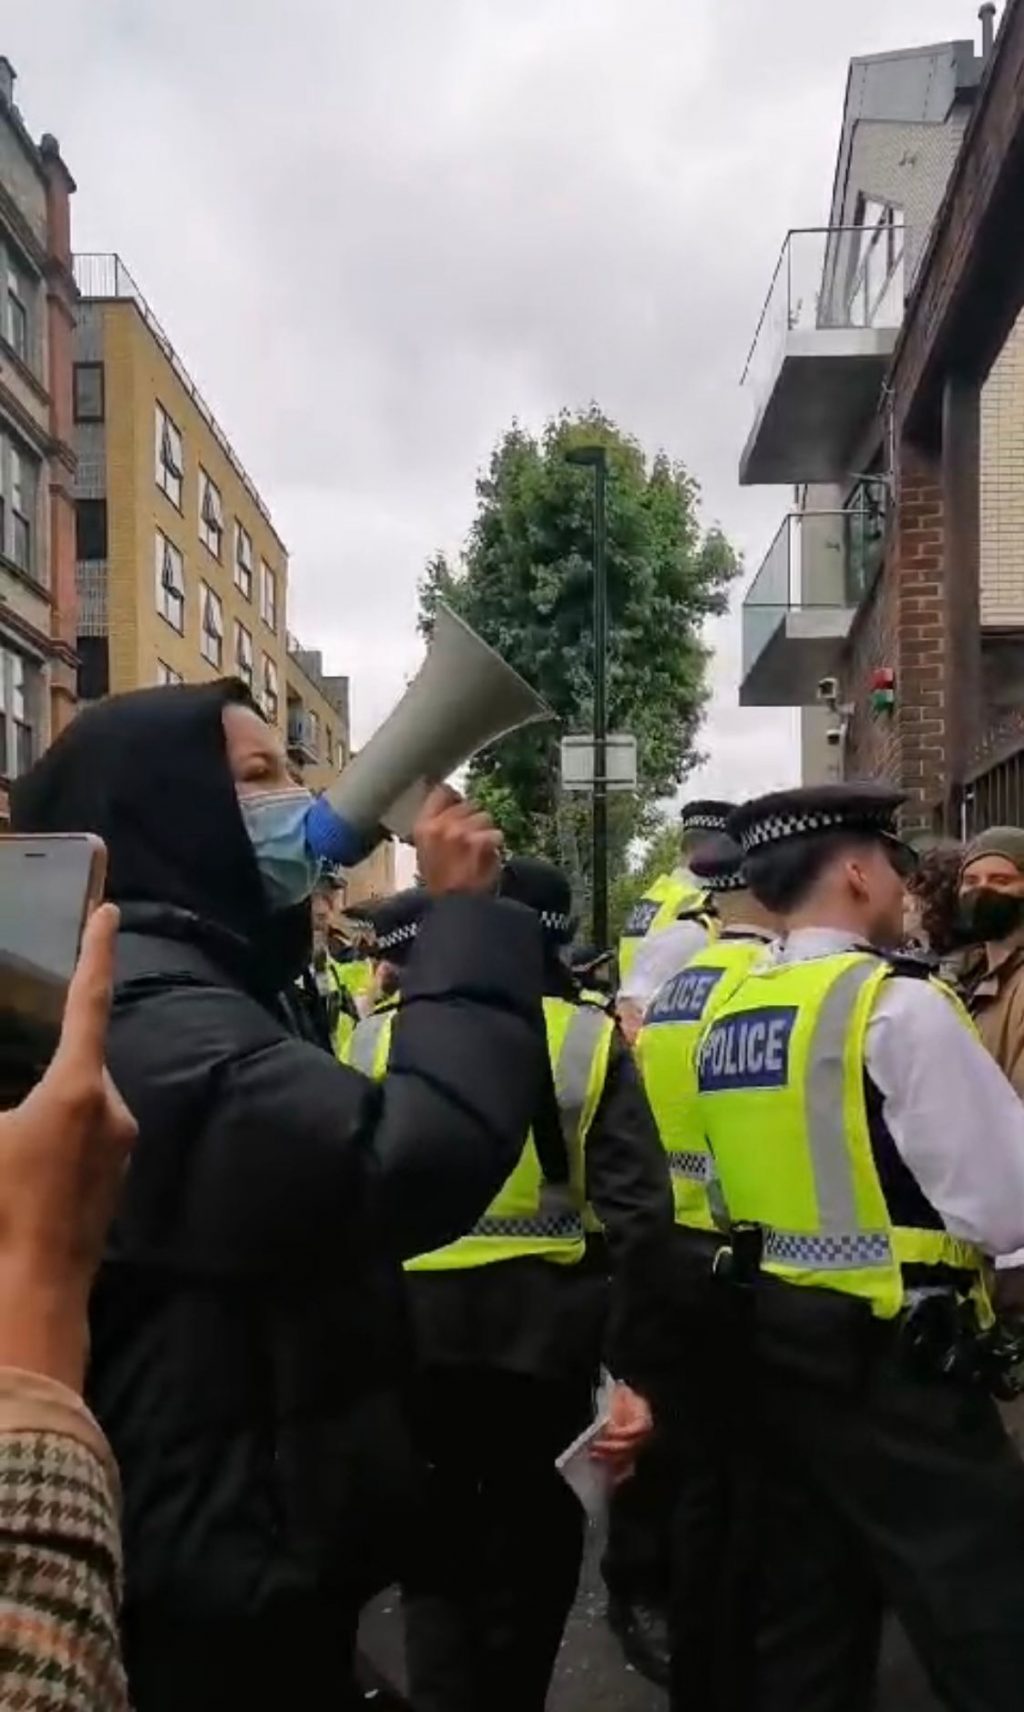 protesters-stood-with-police-at-booth-house-whitechapel 